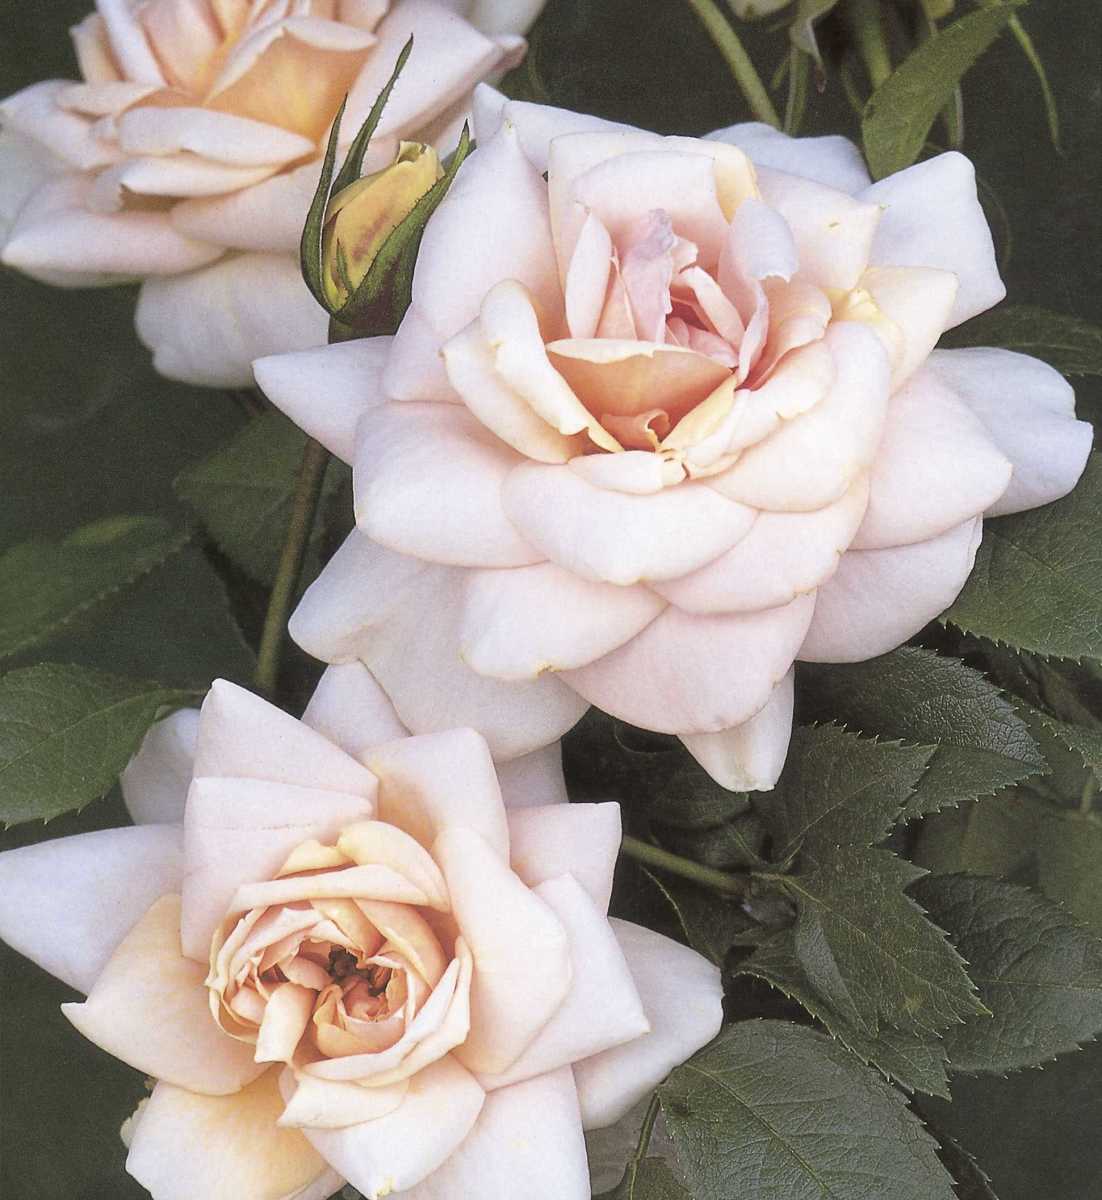 Champagne Moment: Cream colored and tipped with pink roses